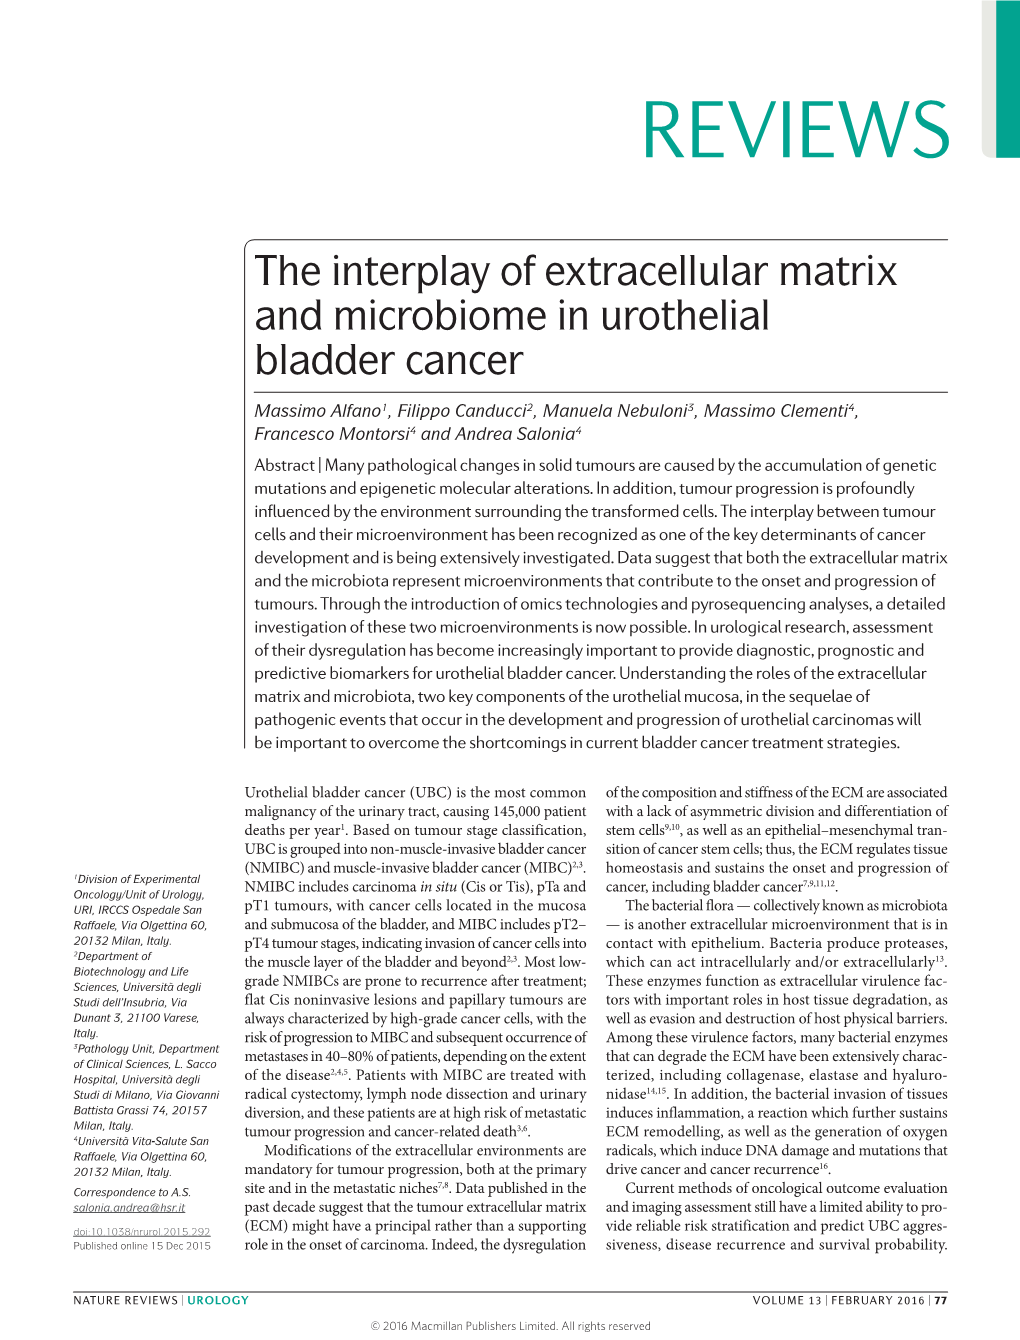 The Interplay of Extracellular Matrix and Microbiome in Urothelial Bladder Cancer